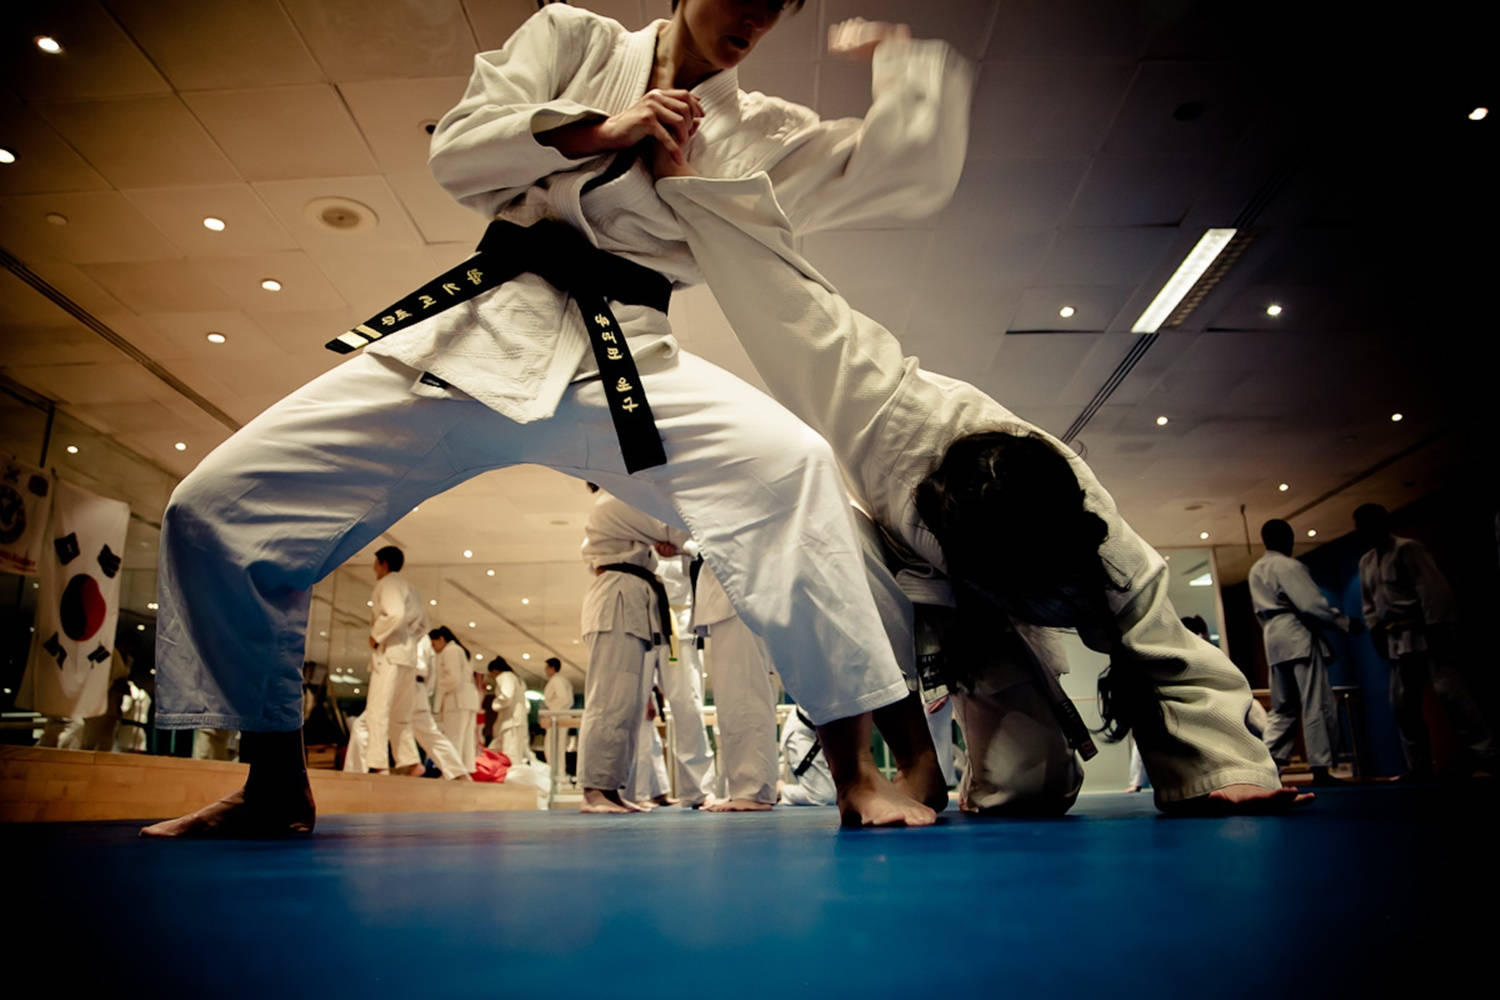 Hapkido Master demonstrating a Wrist-Lock Technique in Class Wallpaper